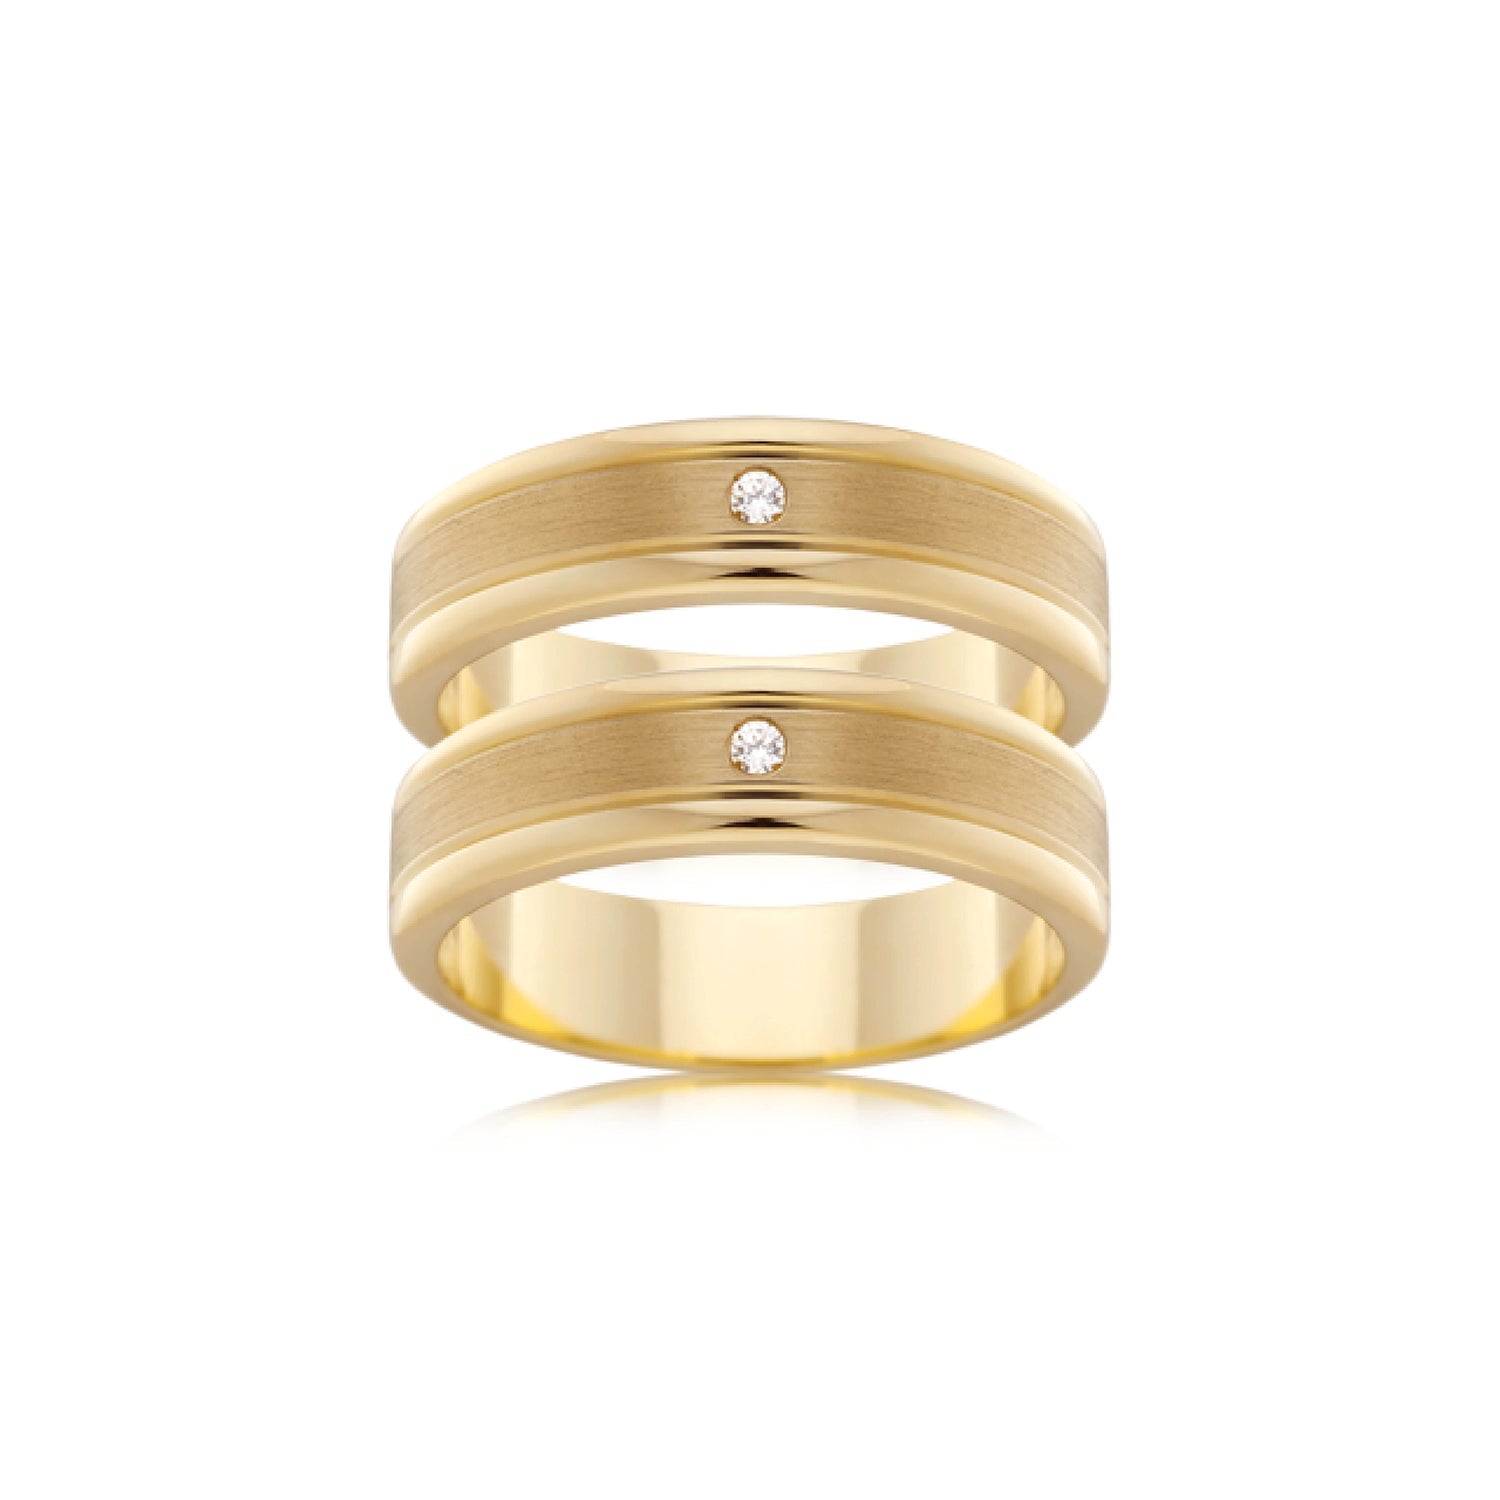 Wedding ring, engagement or commitment ring in yellow gold